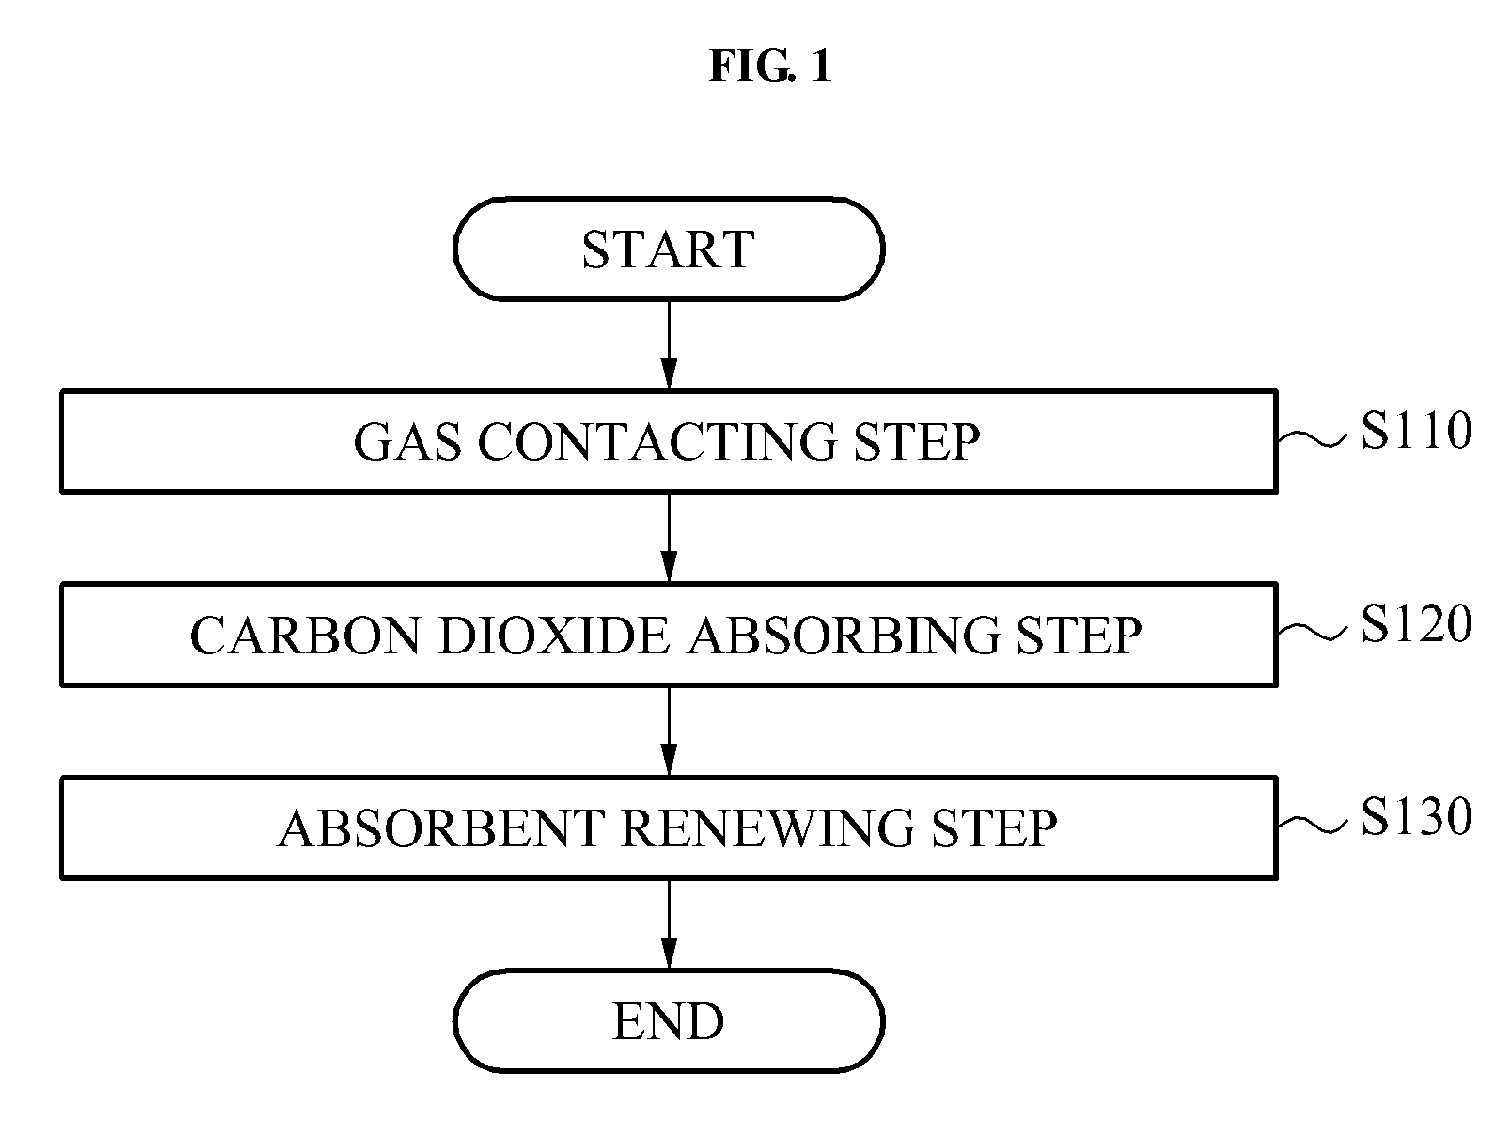 Alkali-Carbonate-Based Carbon Dioxide Absorbent Containing Added Sterically Hindered Cyclic Amines, and Method for Removing Carbon Dioxide Removing Using Same